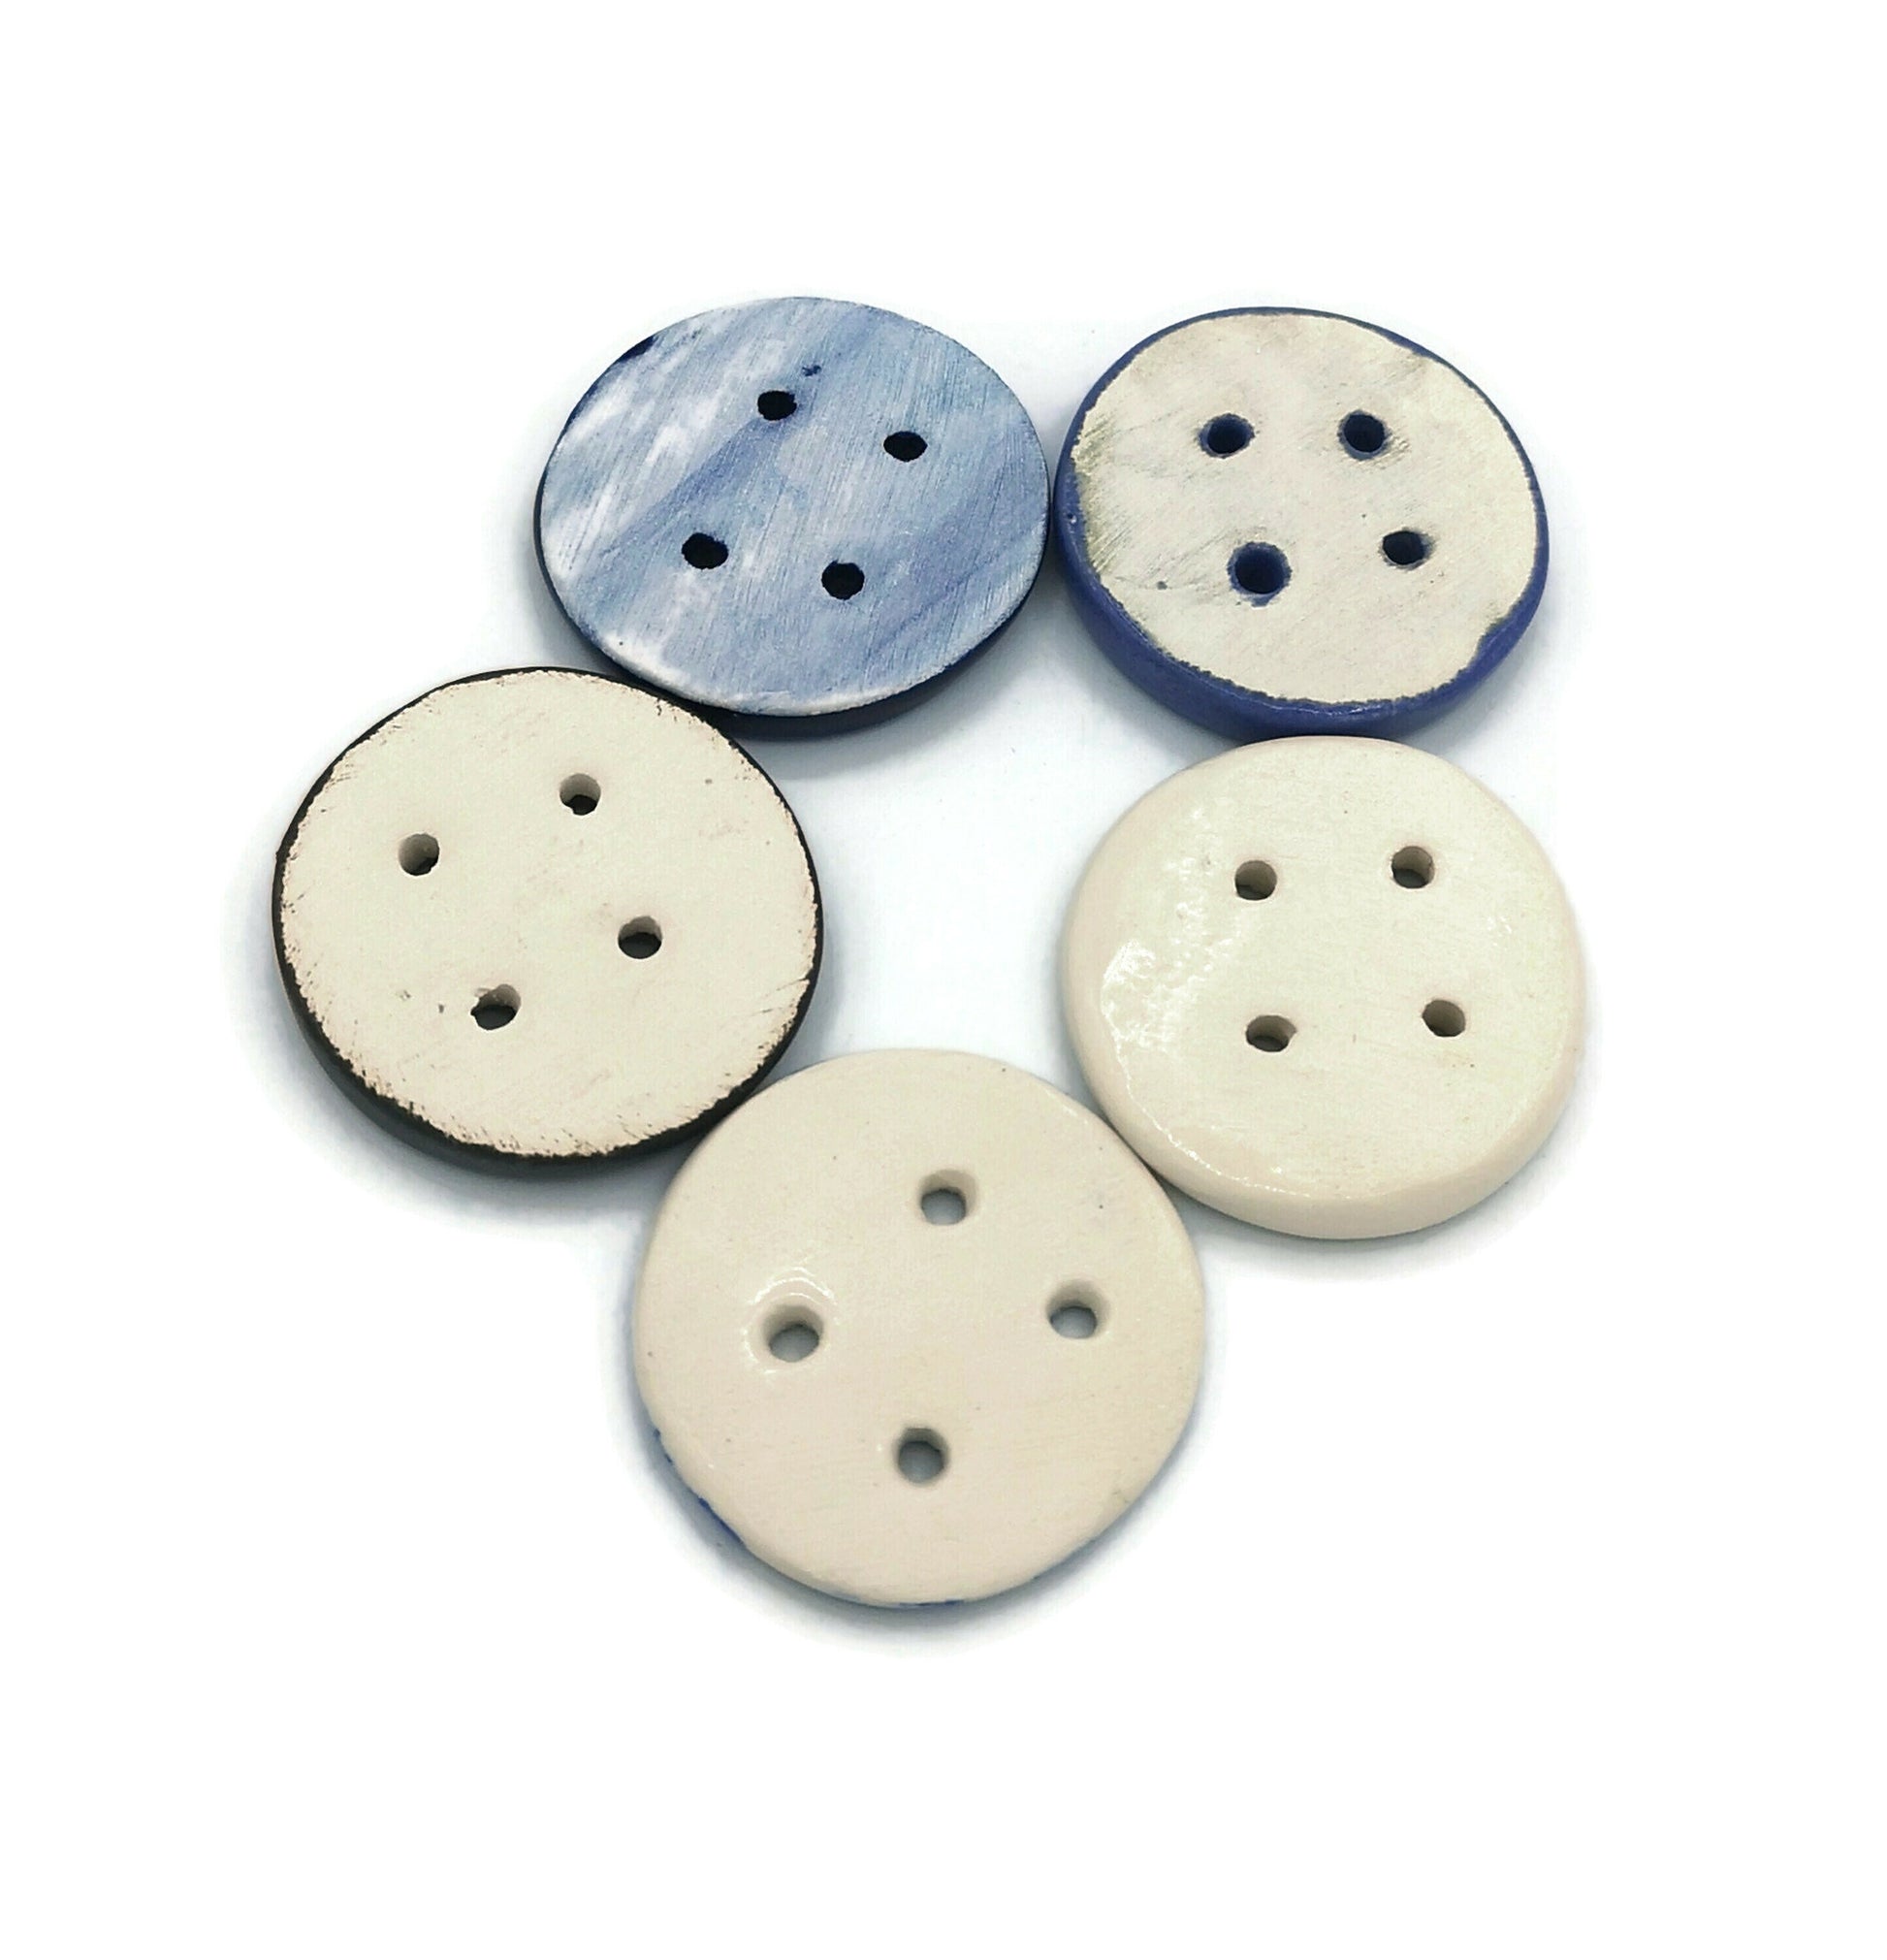 5Pc 40mm Round Sewing Buttons, Handmade Ceramic Unique Coat Buttons Set, Blue Sewing Button For Jewelry Making, Sewing Supplies And Notions - Ceramica Ana Rafael